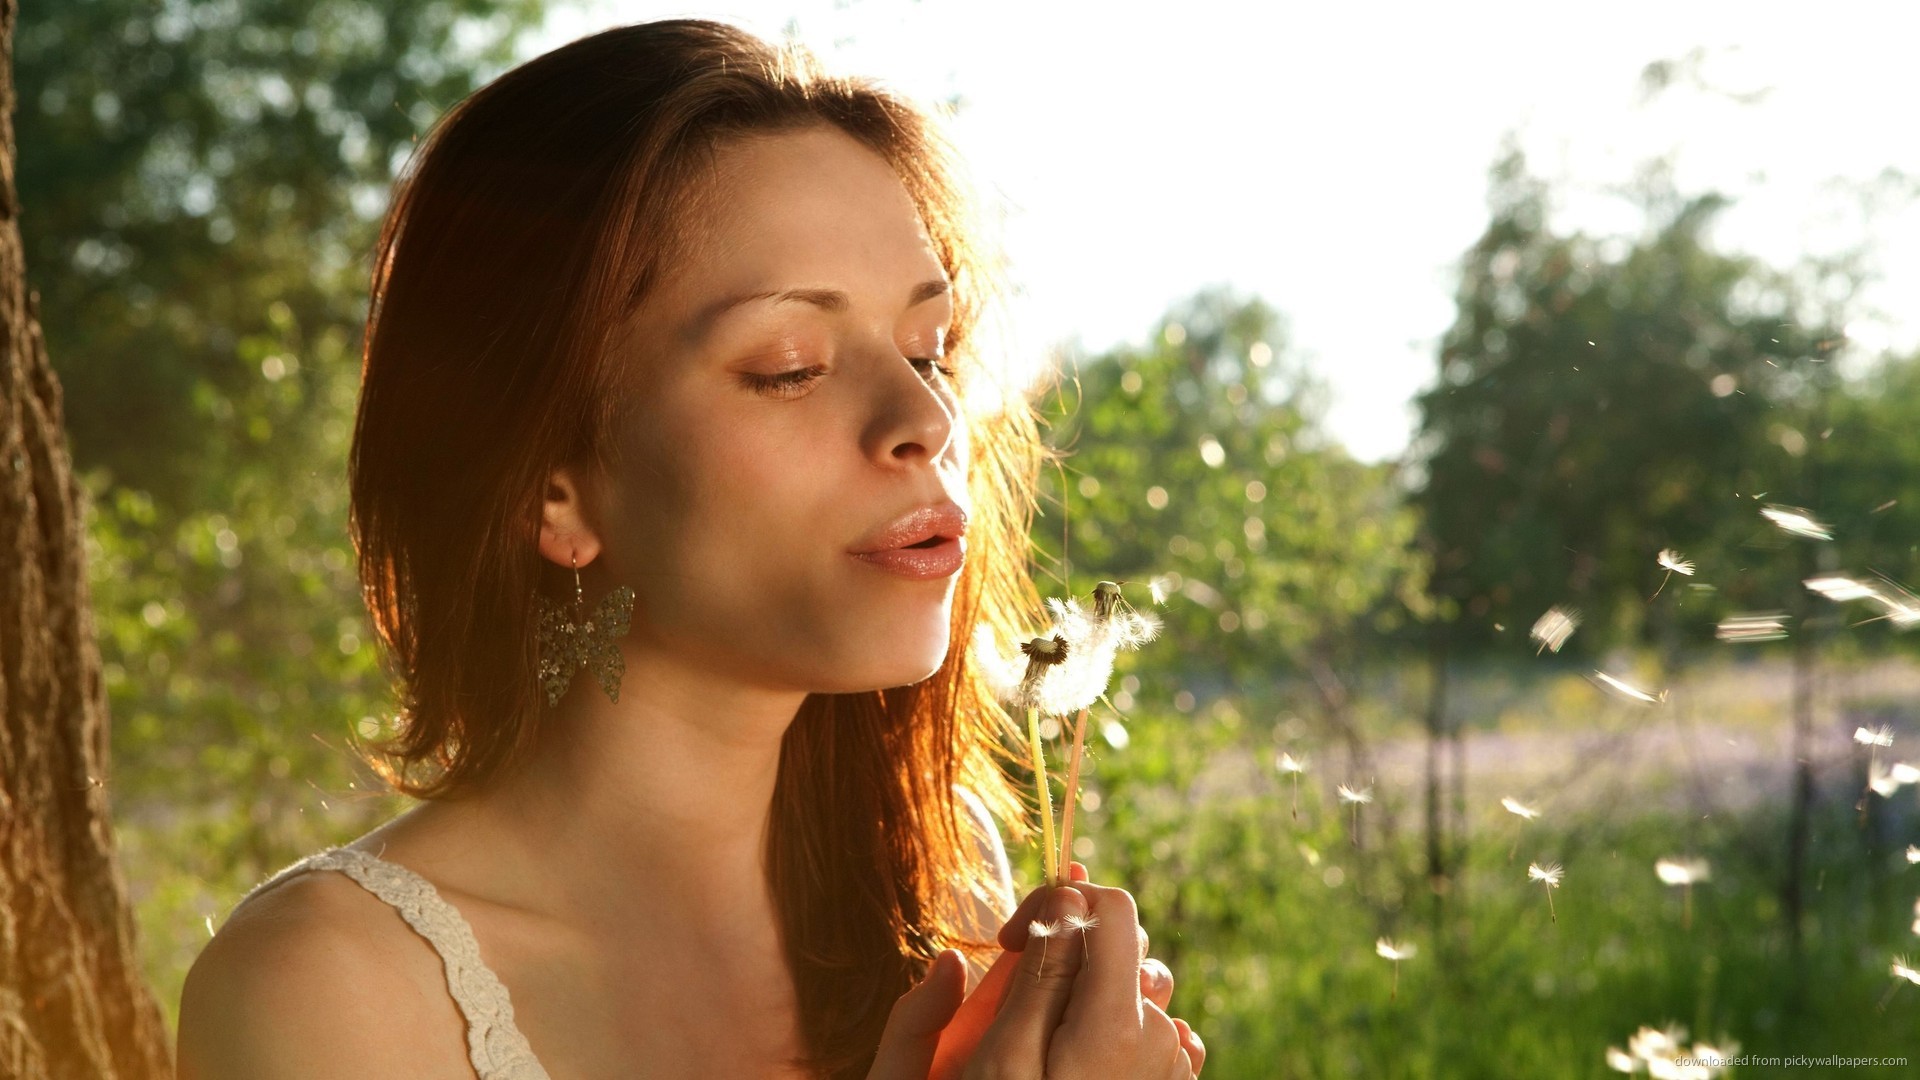 Girl Blowing Dandelion picture